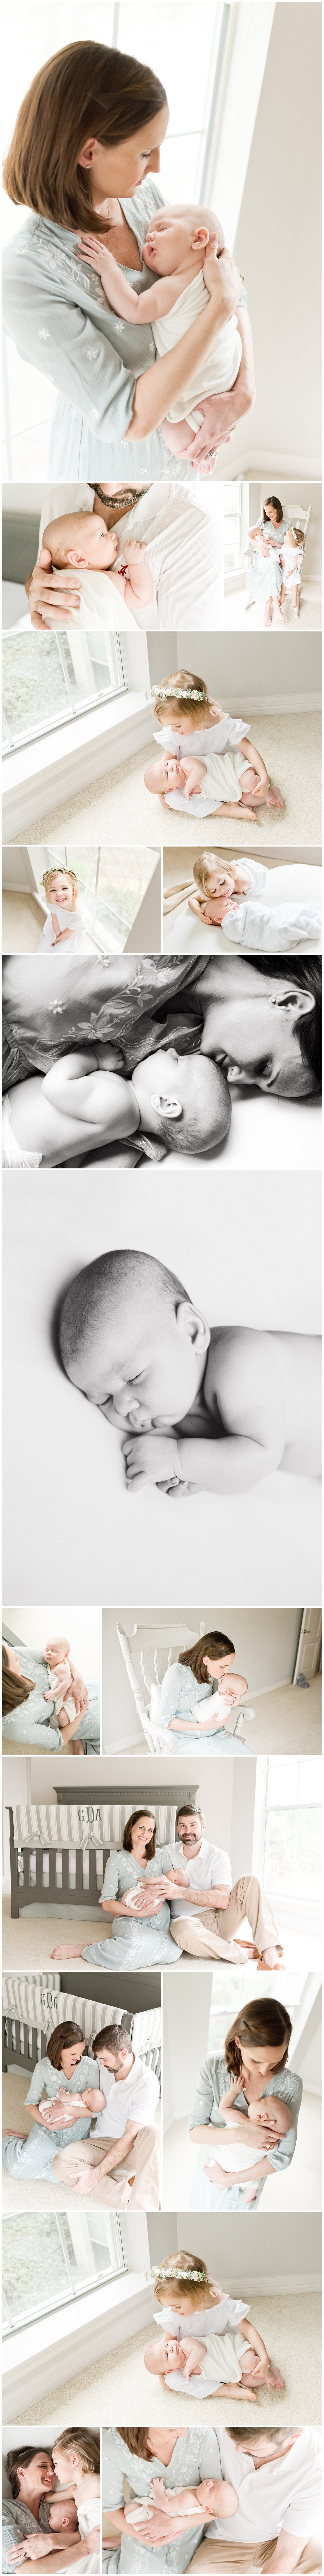 Houston lifestyle newborn photographer in home family newborn with baby boy and toddler